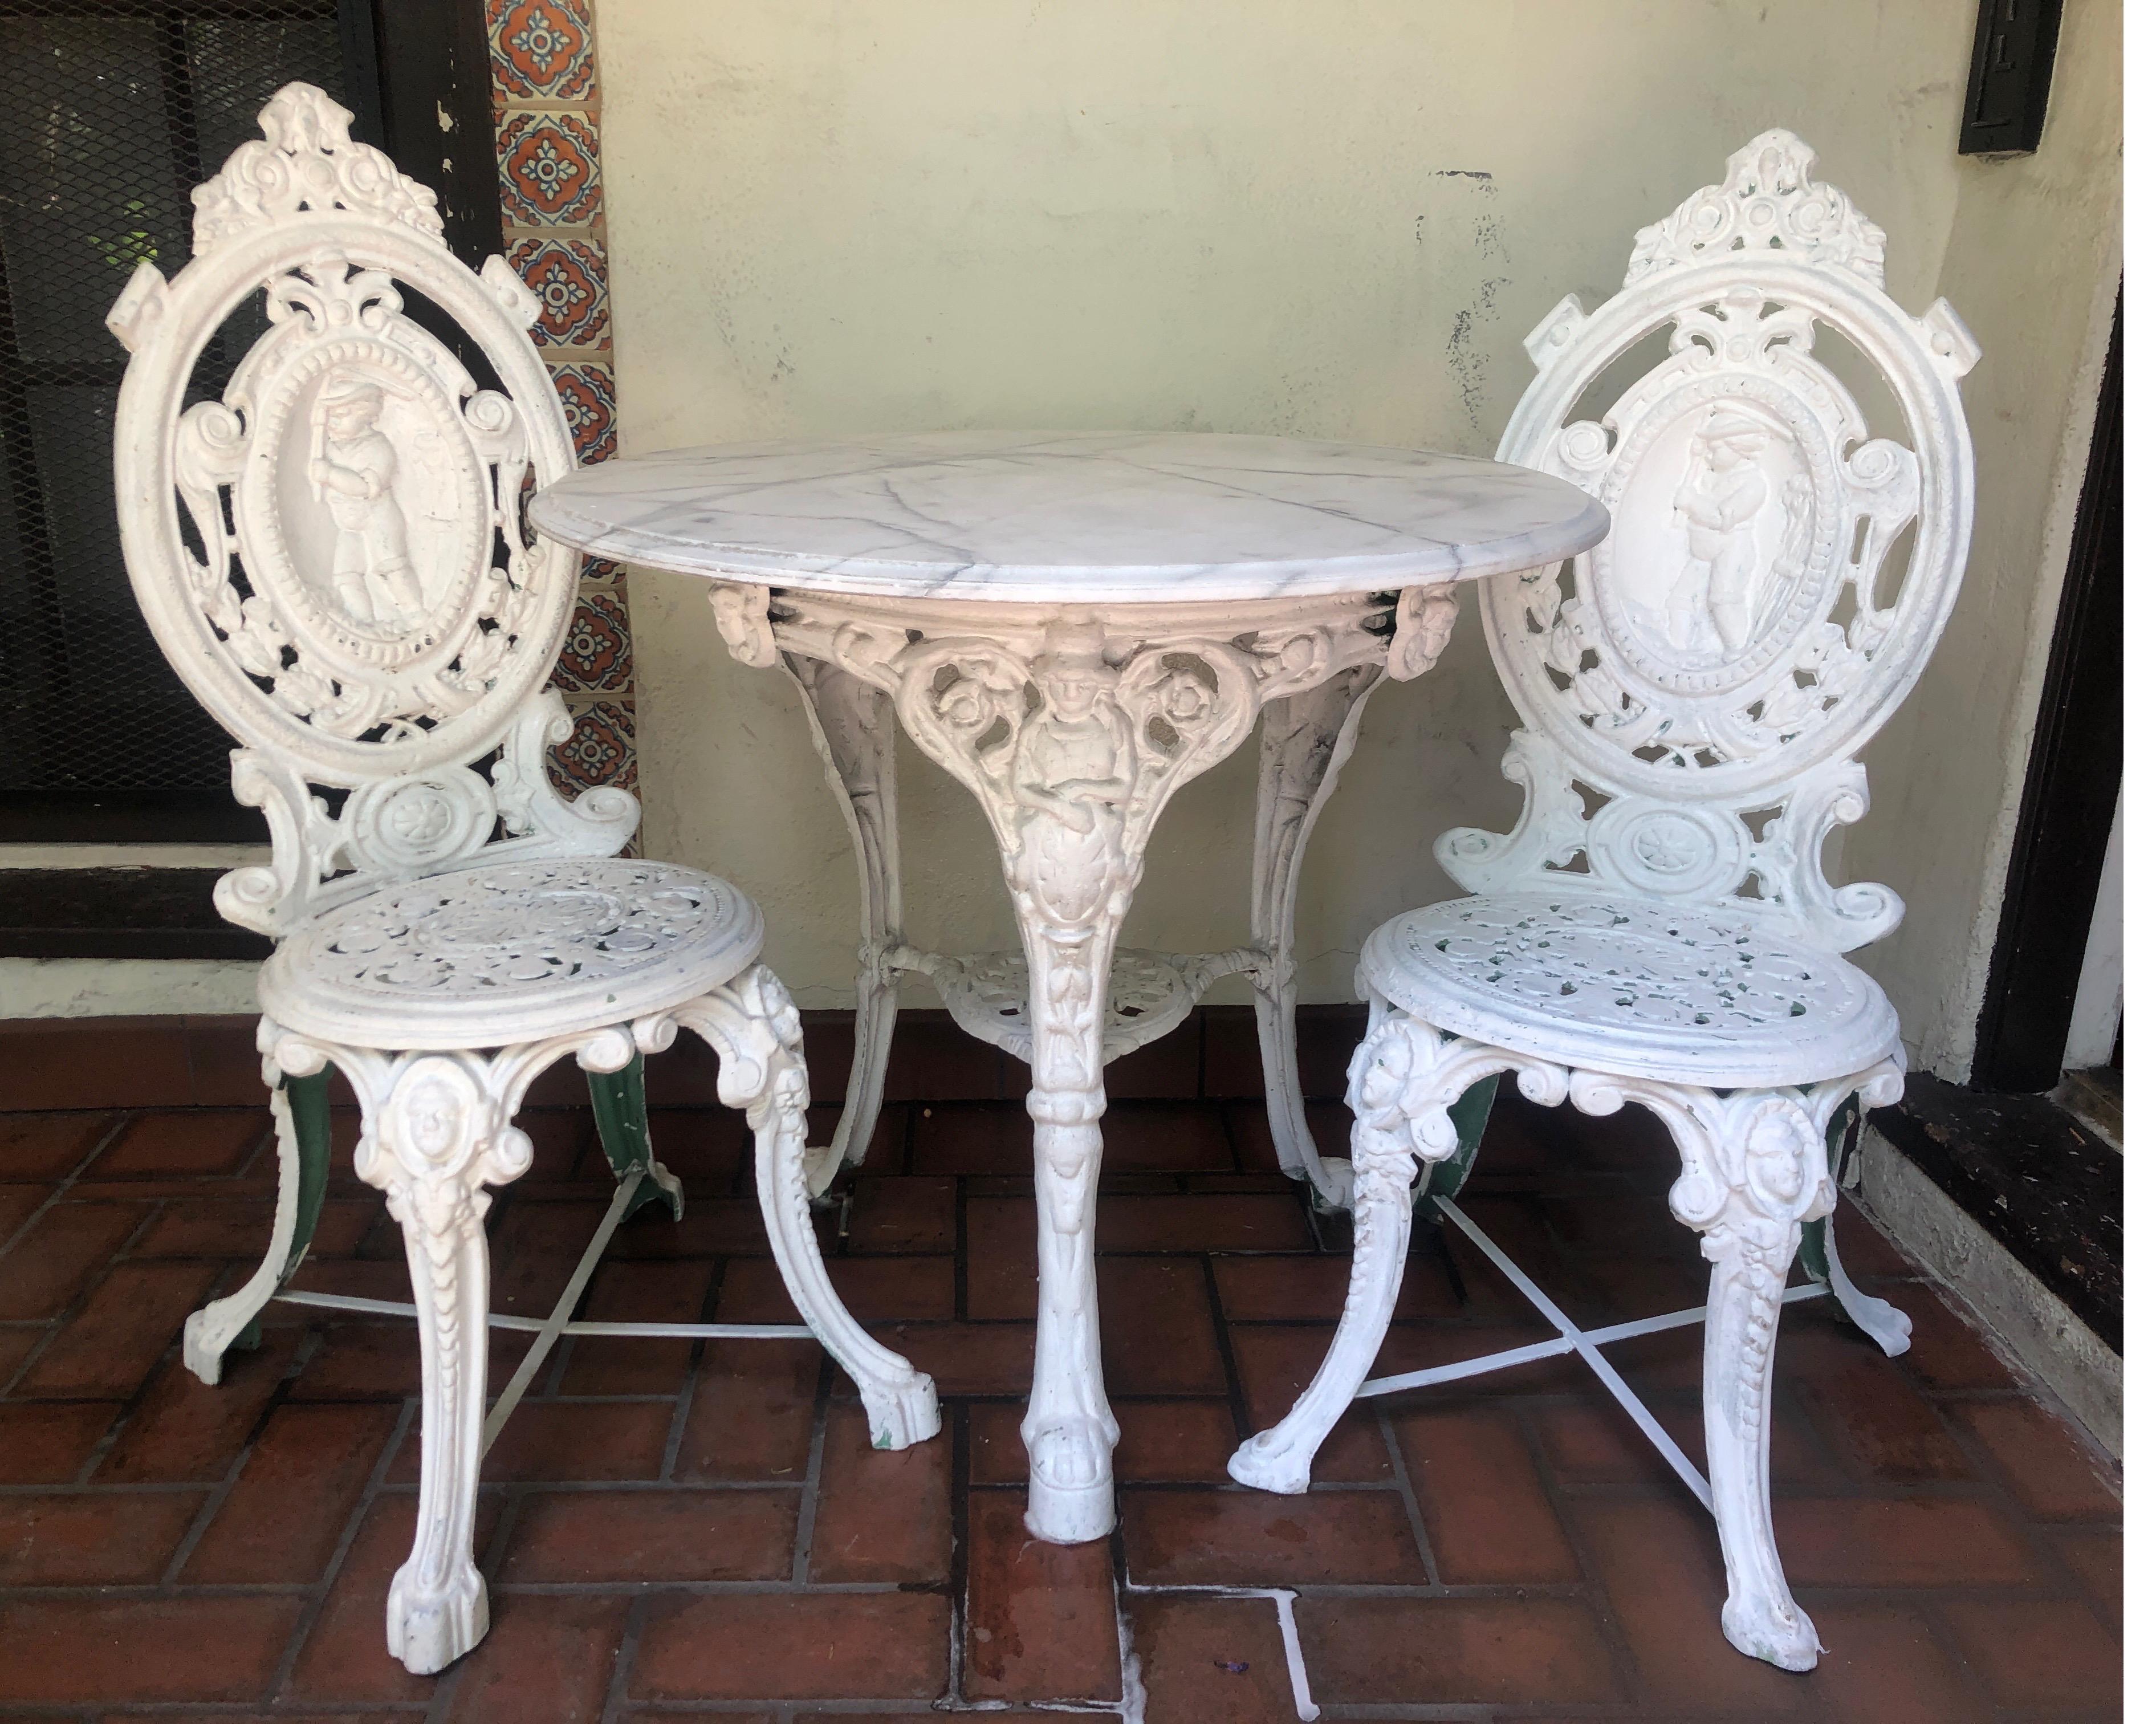 Direct from England.
Gorgeous white Victorian bistro/pub table set. Includes table and two chairs. 
Features a Carrera marble top with black/gray veining. 

Three upper legs have a figural 